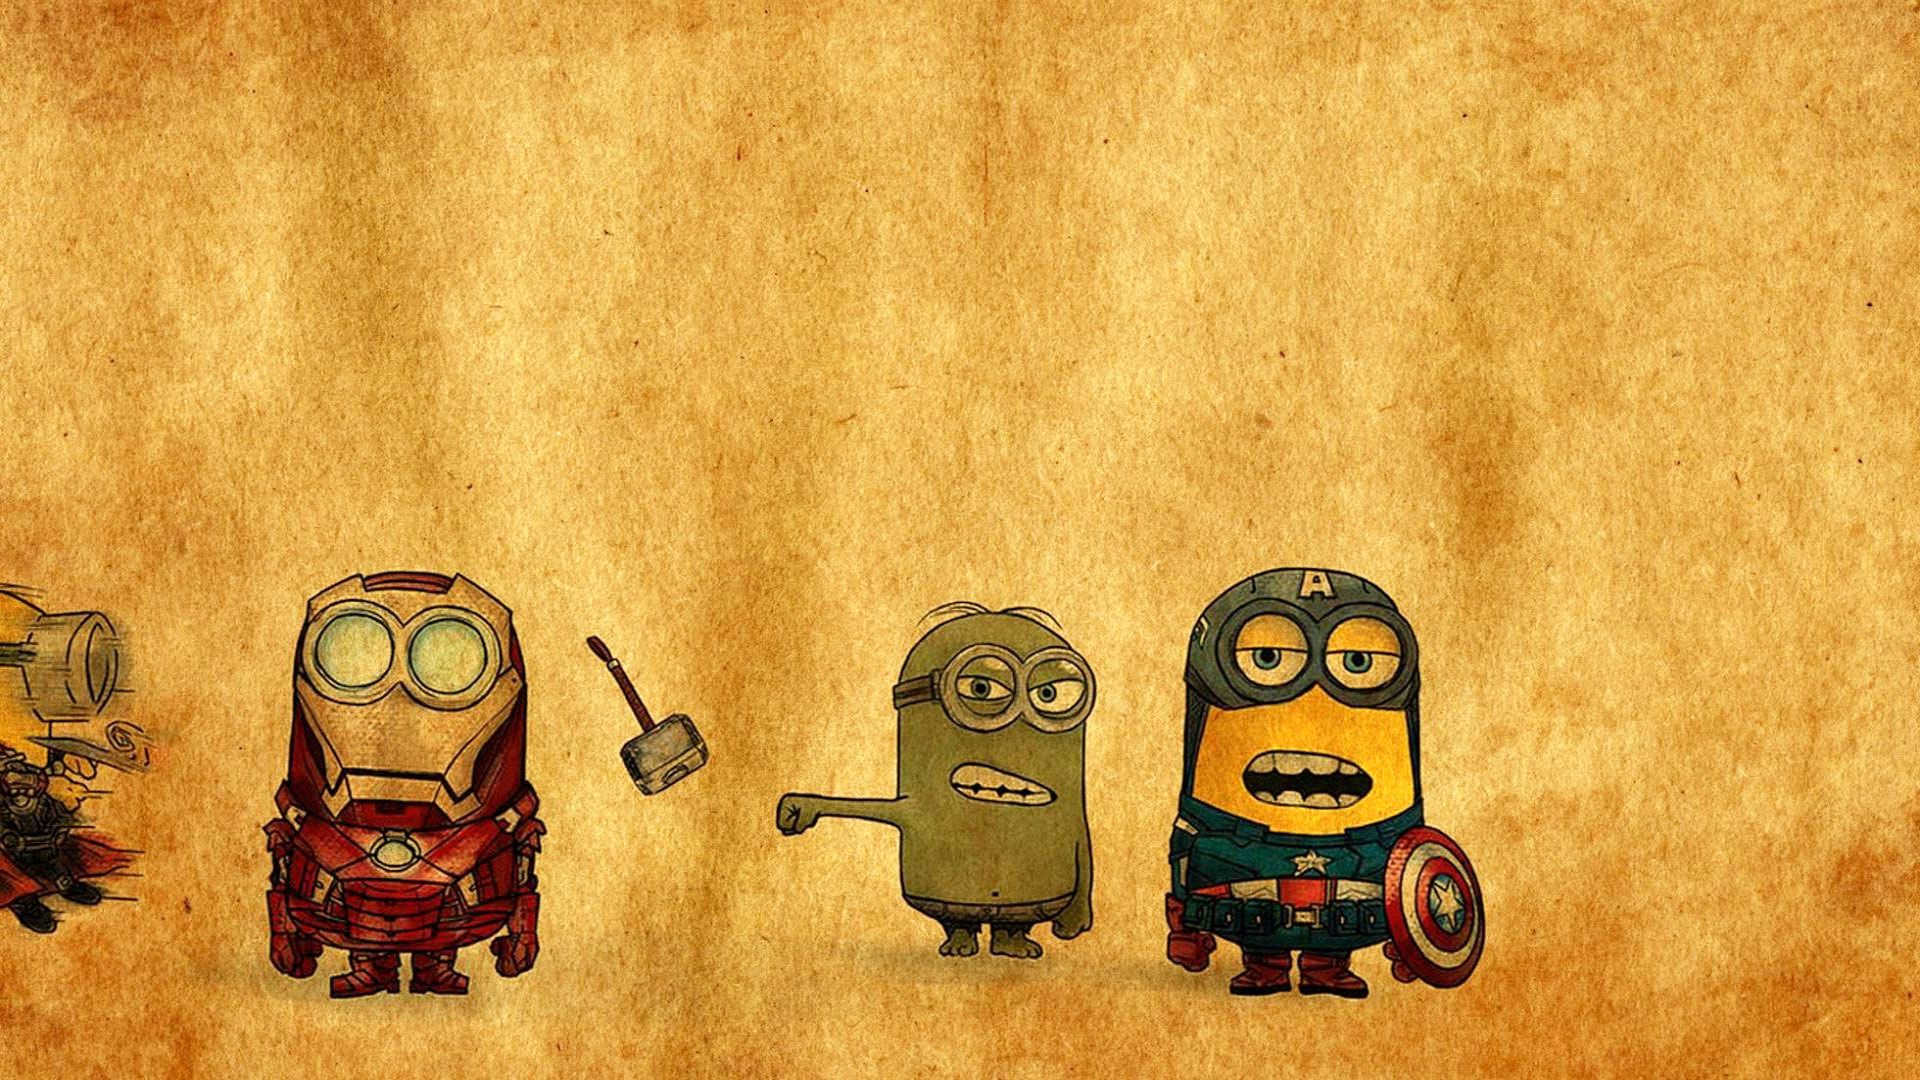 Minions wallpapers on Pinterest Despicable Me 2, Despicable Me